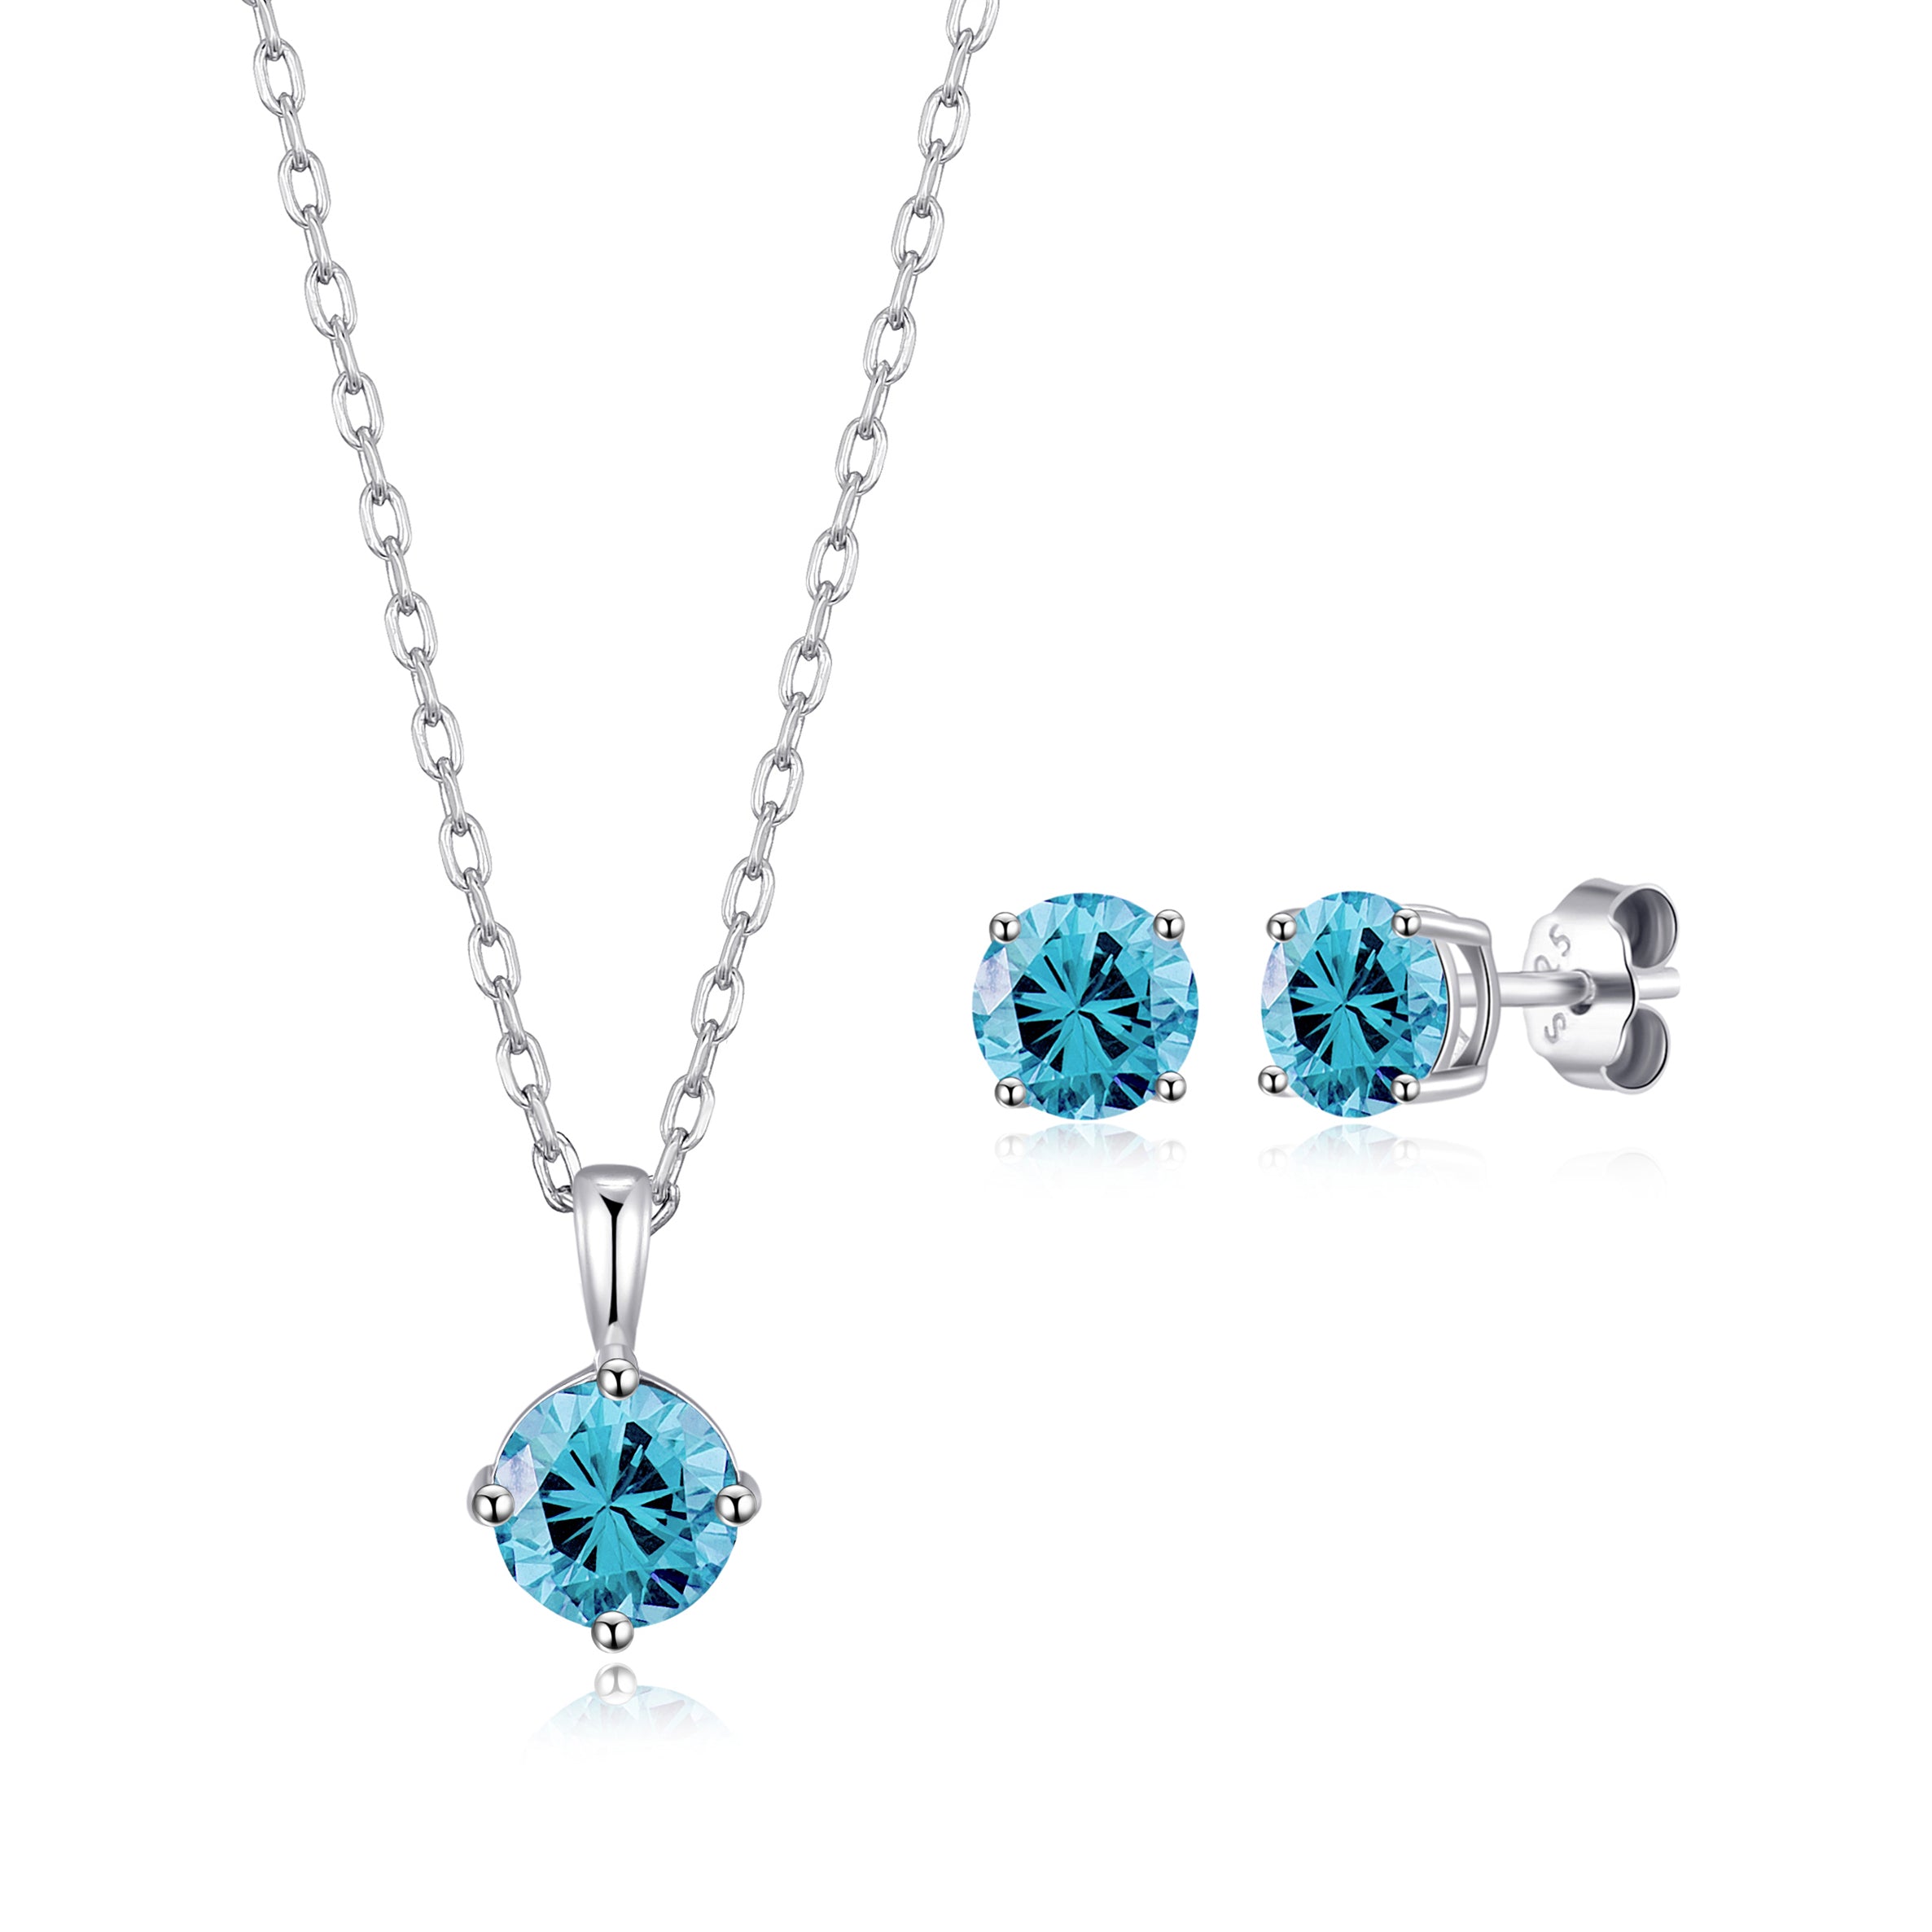 Sterling Silver March (Aquamarine) Birthstone Necklace & Earrings Set Created with Zircondia® Crystals by Philip Jones Jewellery